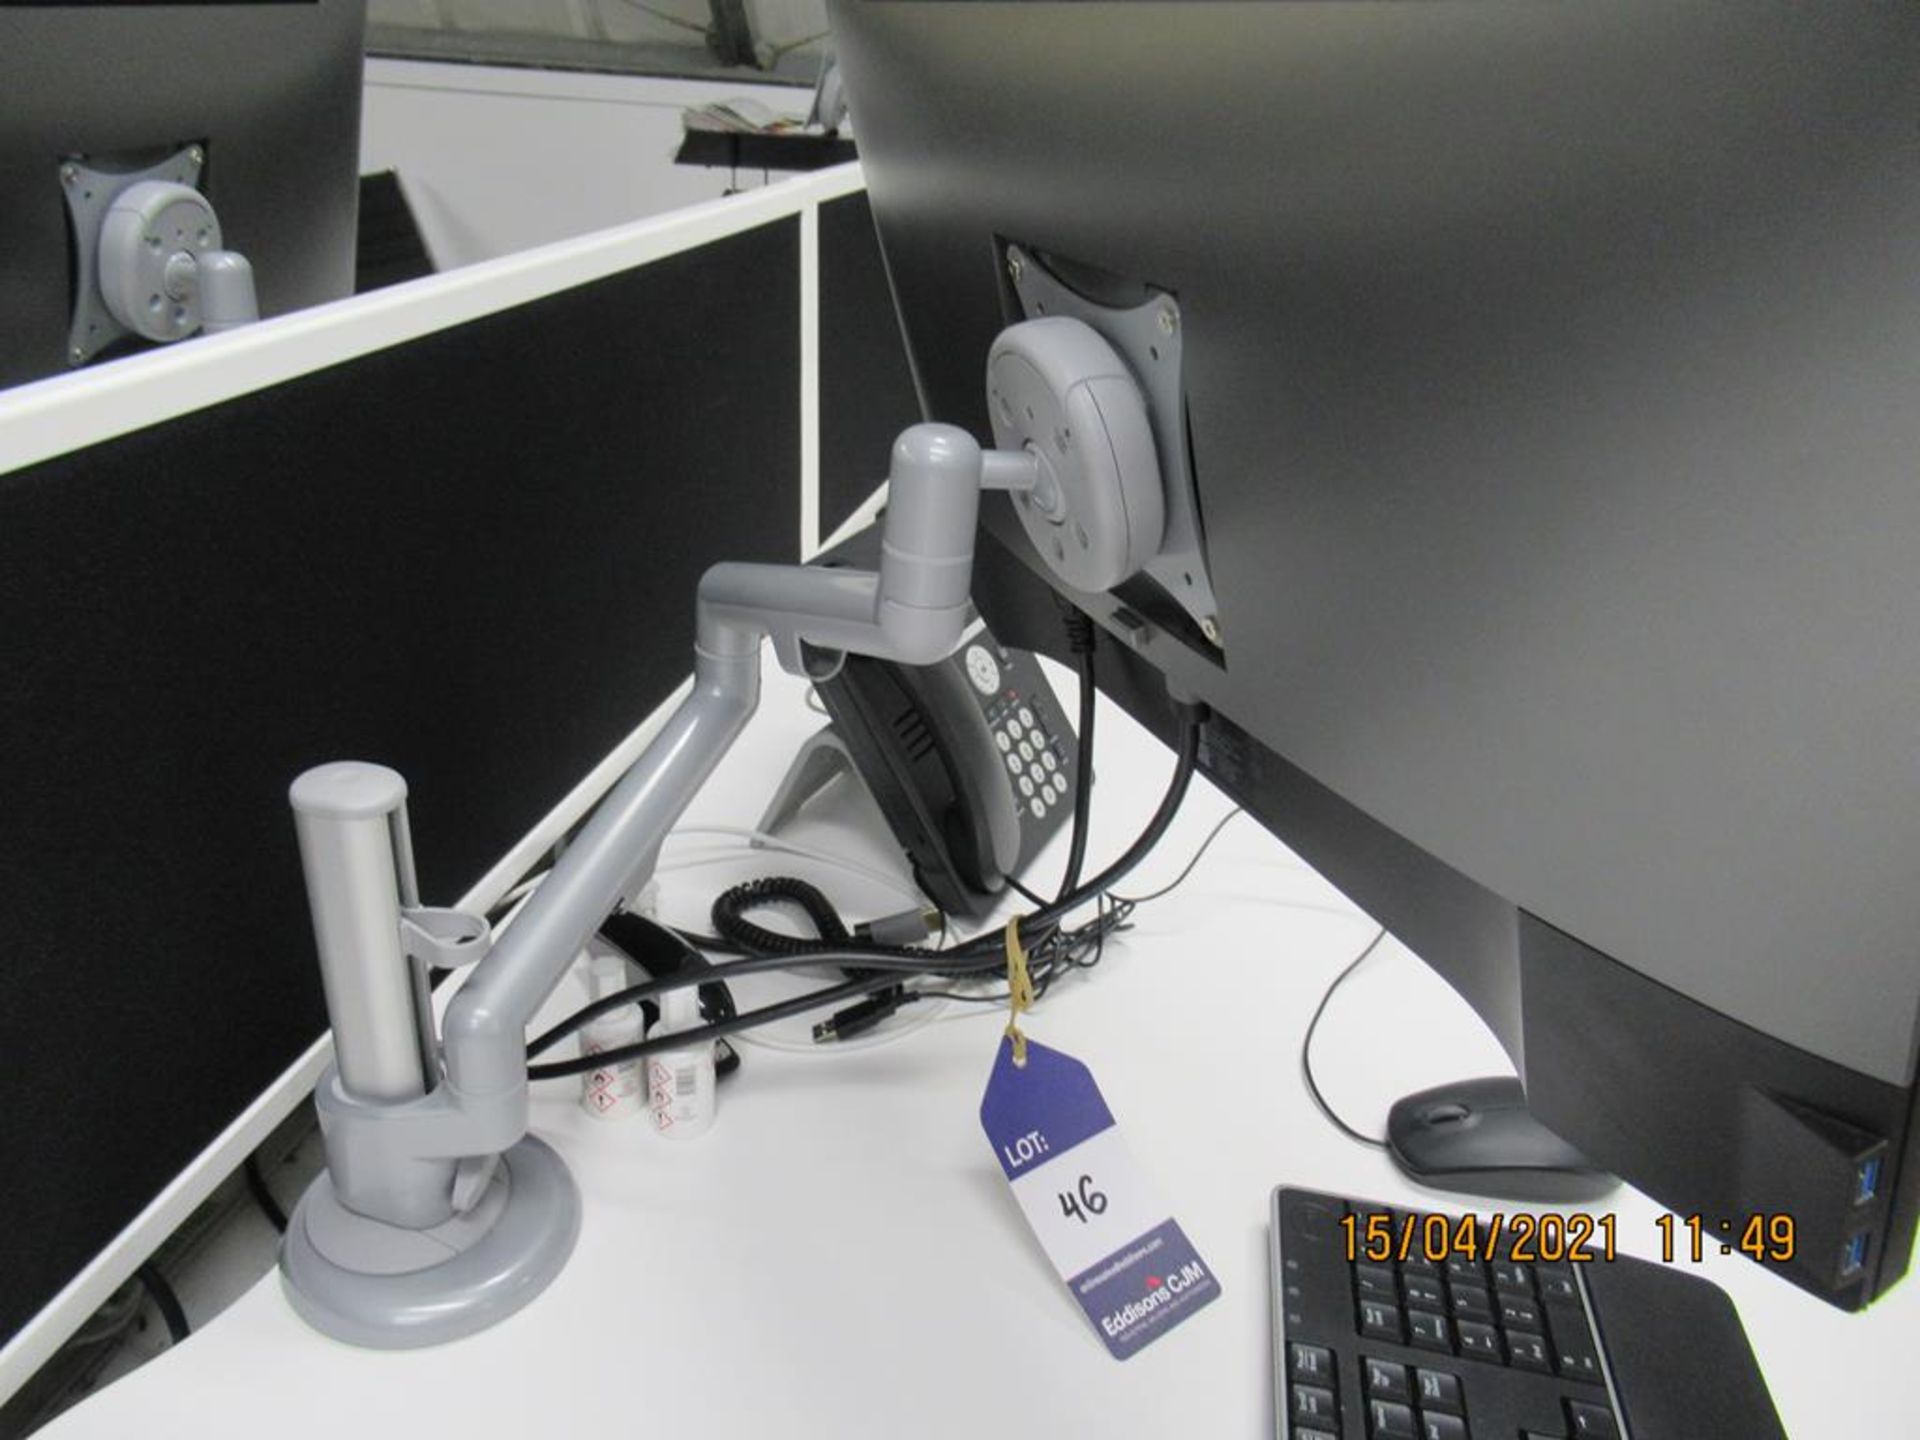 2x Dell Flat Screen Monitors with Keyboards, Mouses, Monitor Stands Included - Image 3 of 3